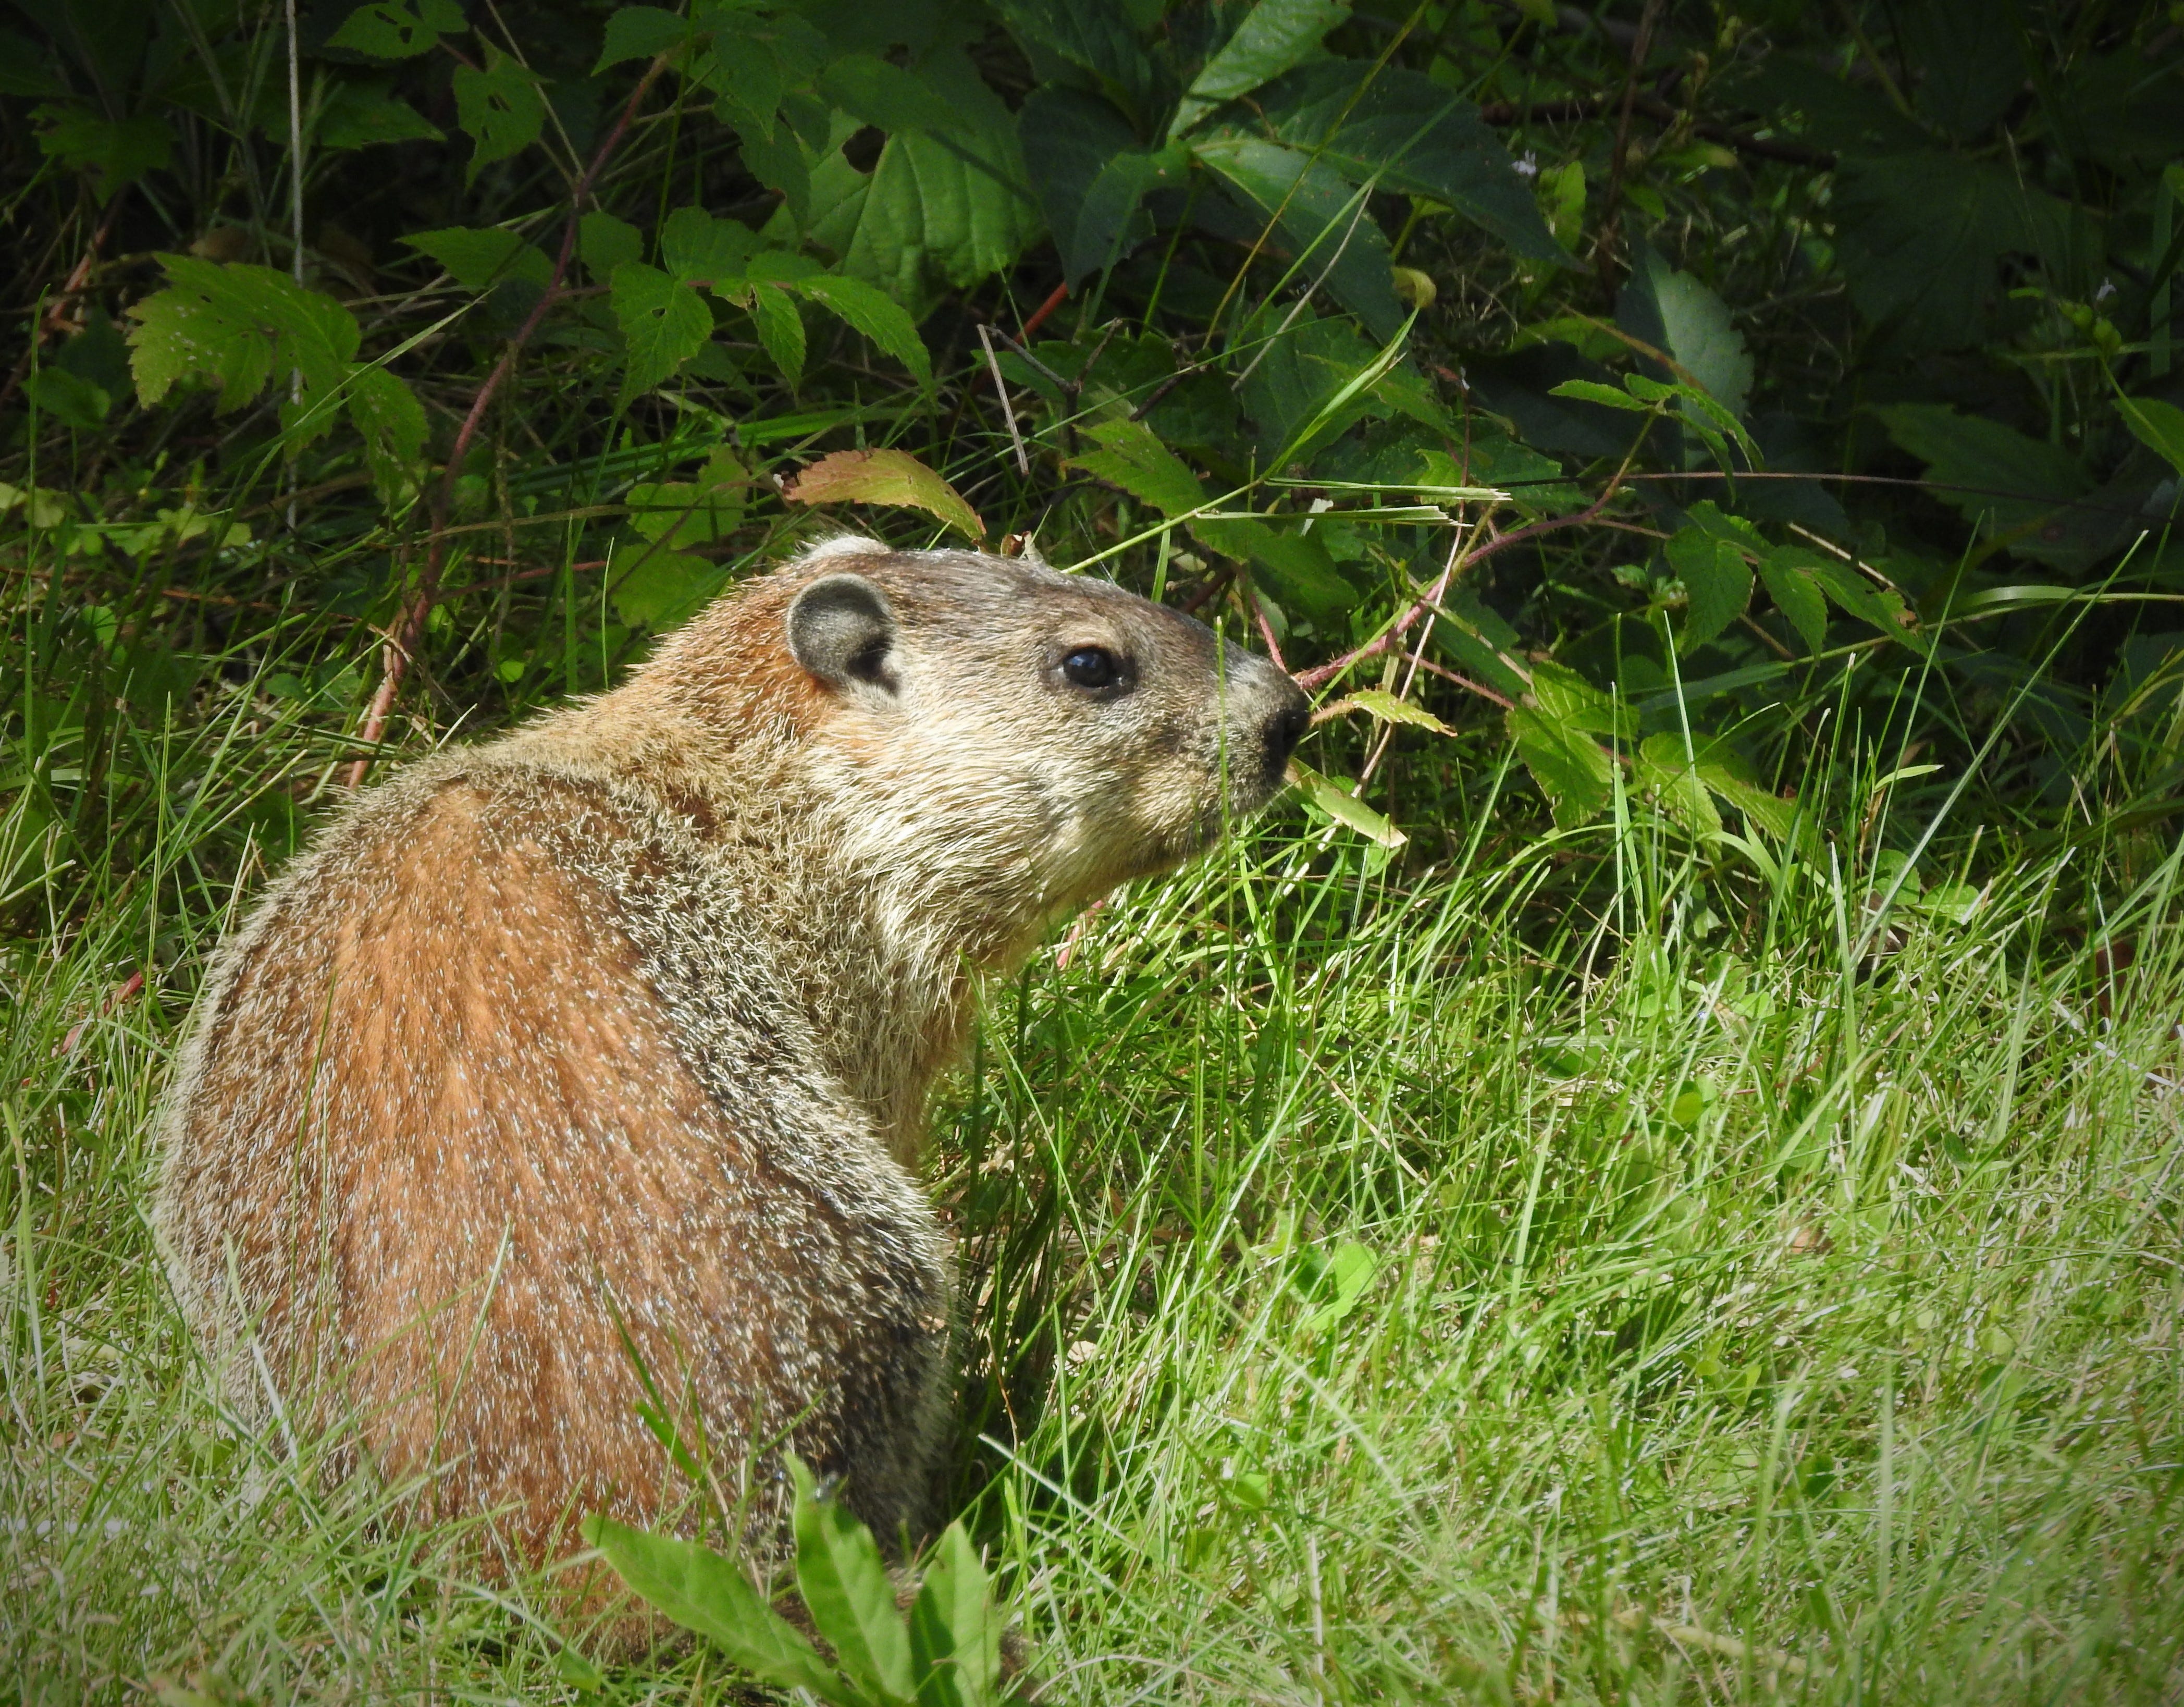 Woodchucks, also known as a groundhog or whistle pig, are marmots